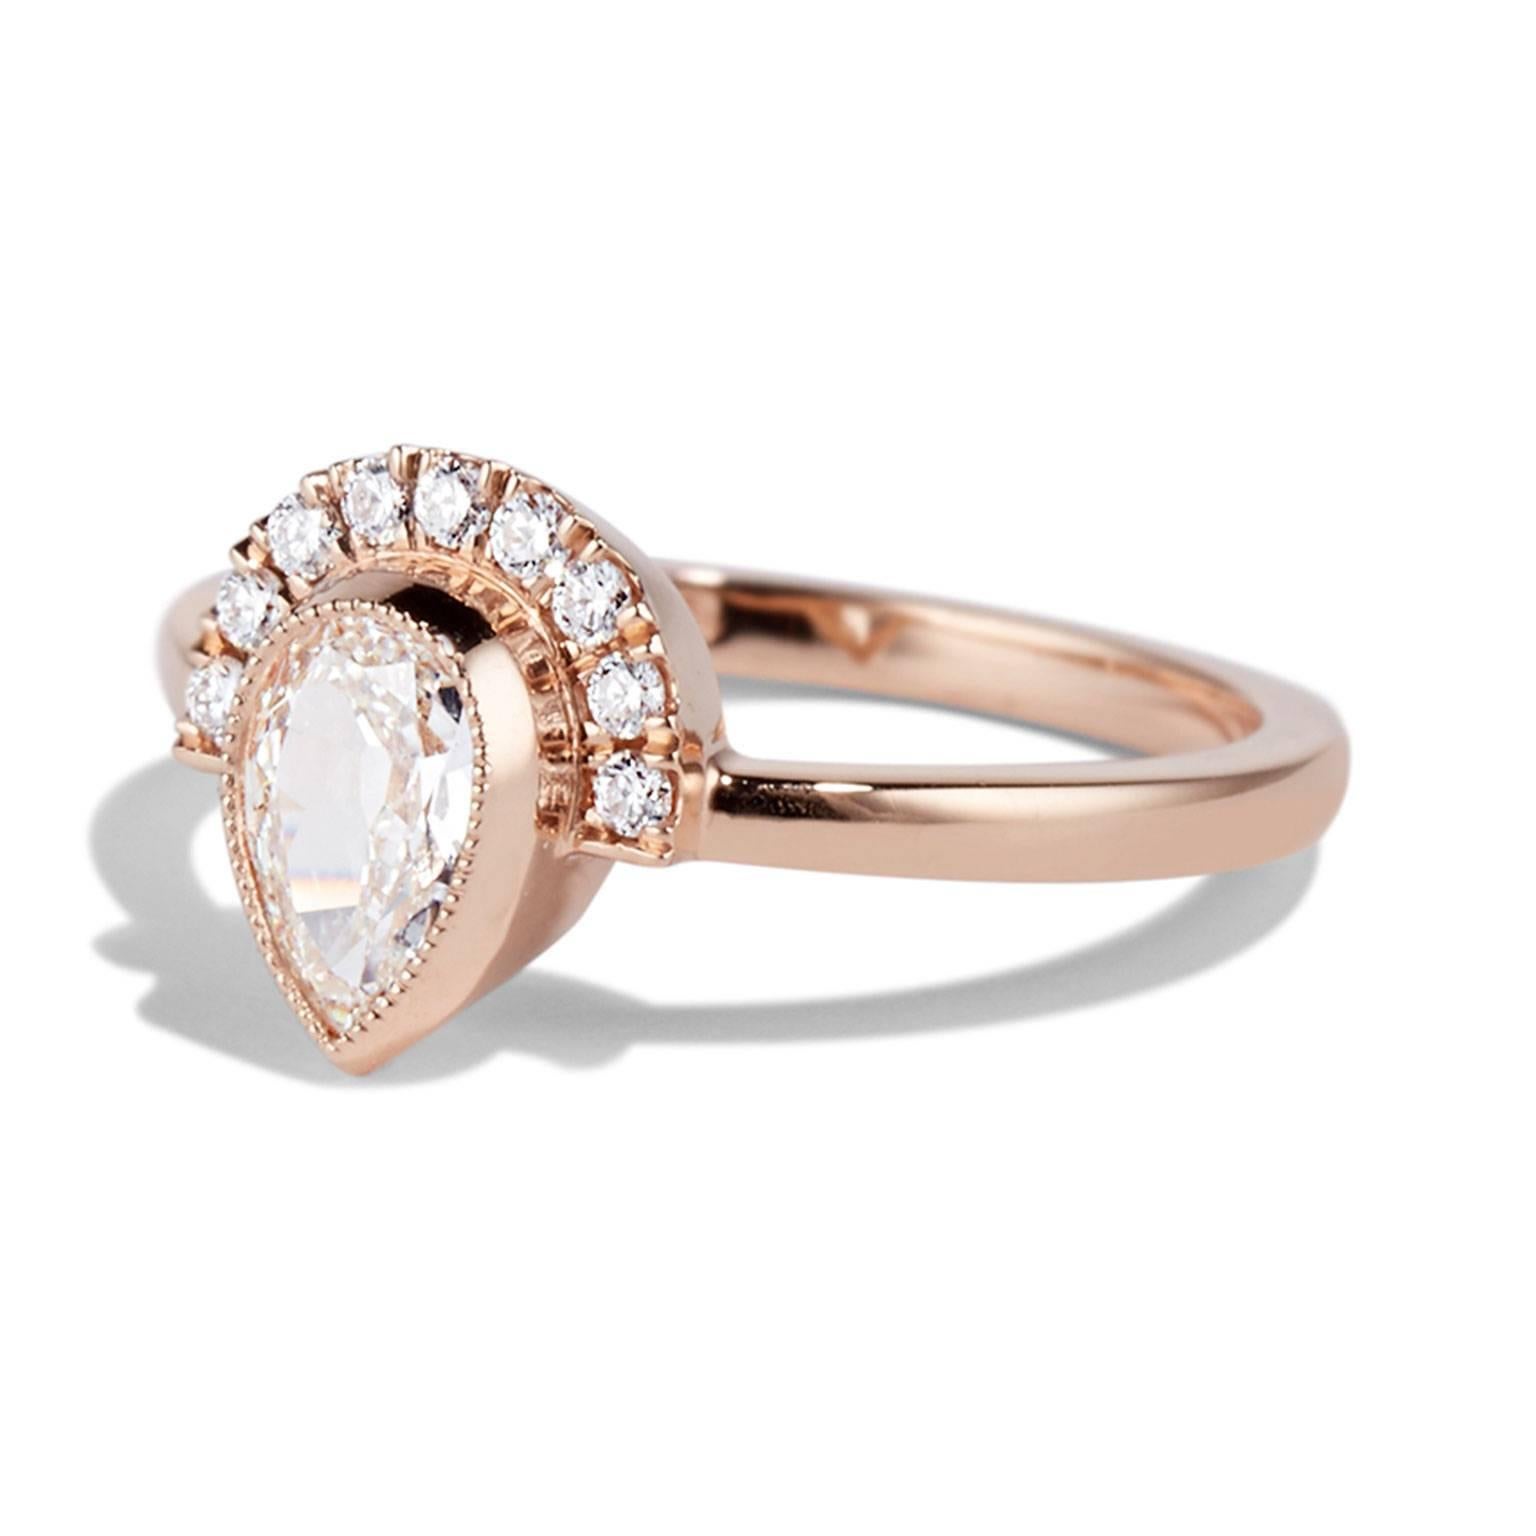 Holly is a contemporary design with antique details. This very special pear shaped diamond is cut in an antique style giving less sparkle and a softer elegant look. This is complemented by the rose gold and milgrain detailing around the halo.